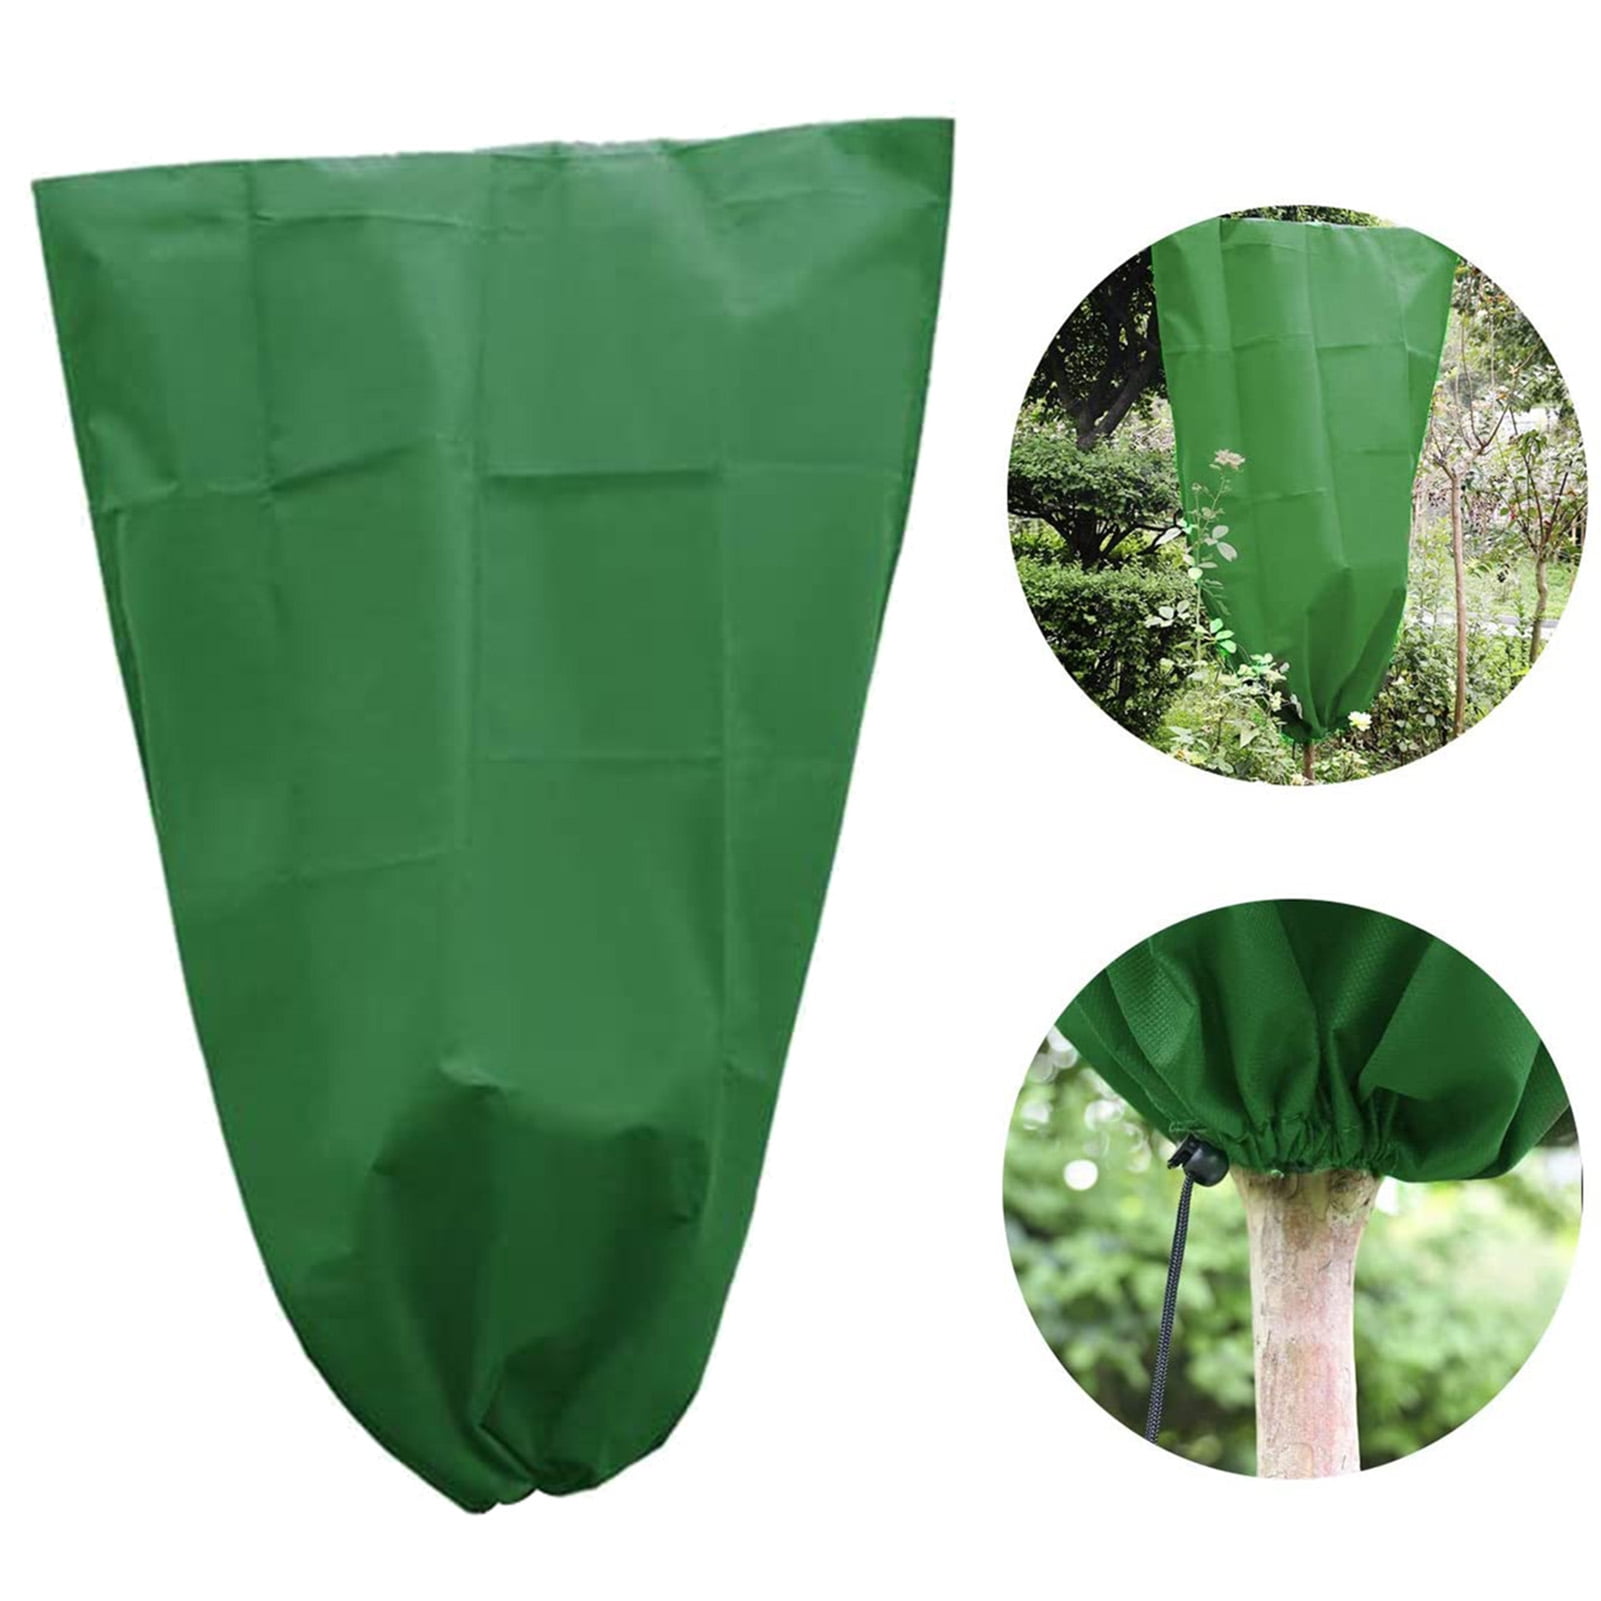 Bobody Winter Plant Covered Warm Protective Pockets Garden Plant Cover Frost Frozen Protection 